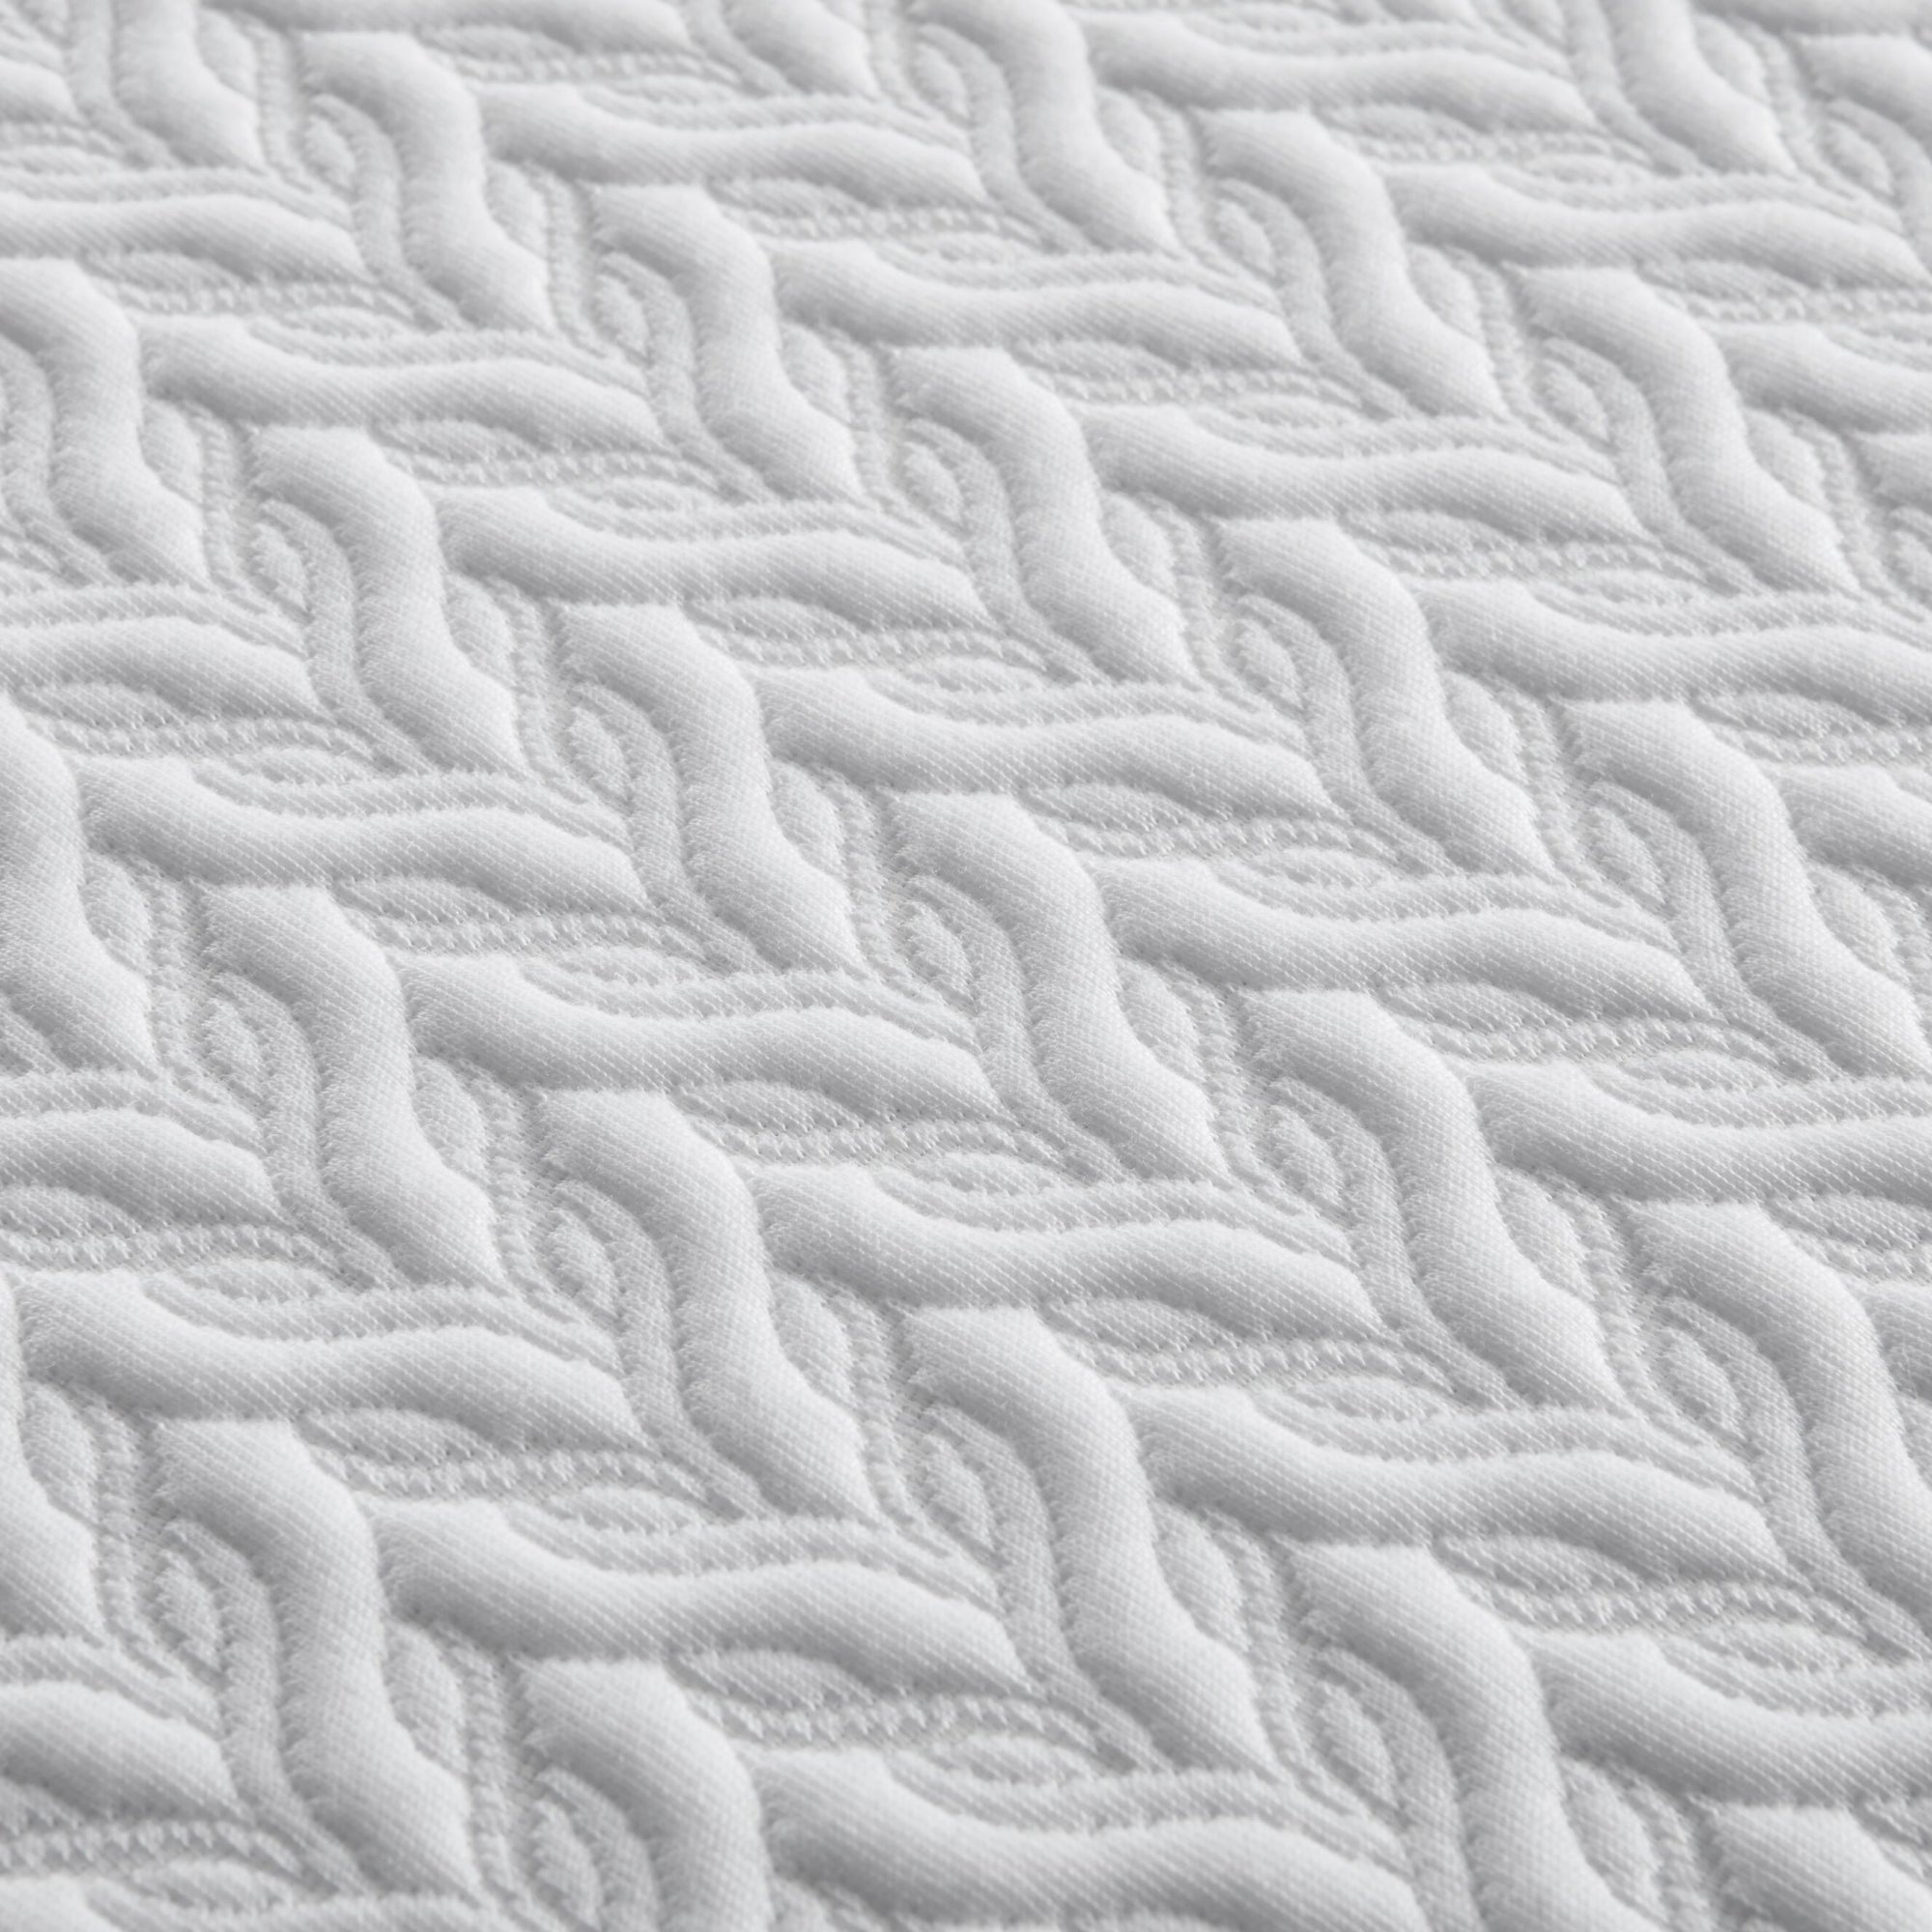 Close-up view of the material on the Beautyrest Select hybrid mattress ||feel: medium